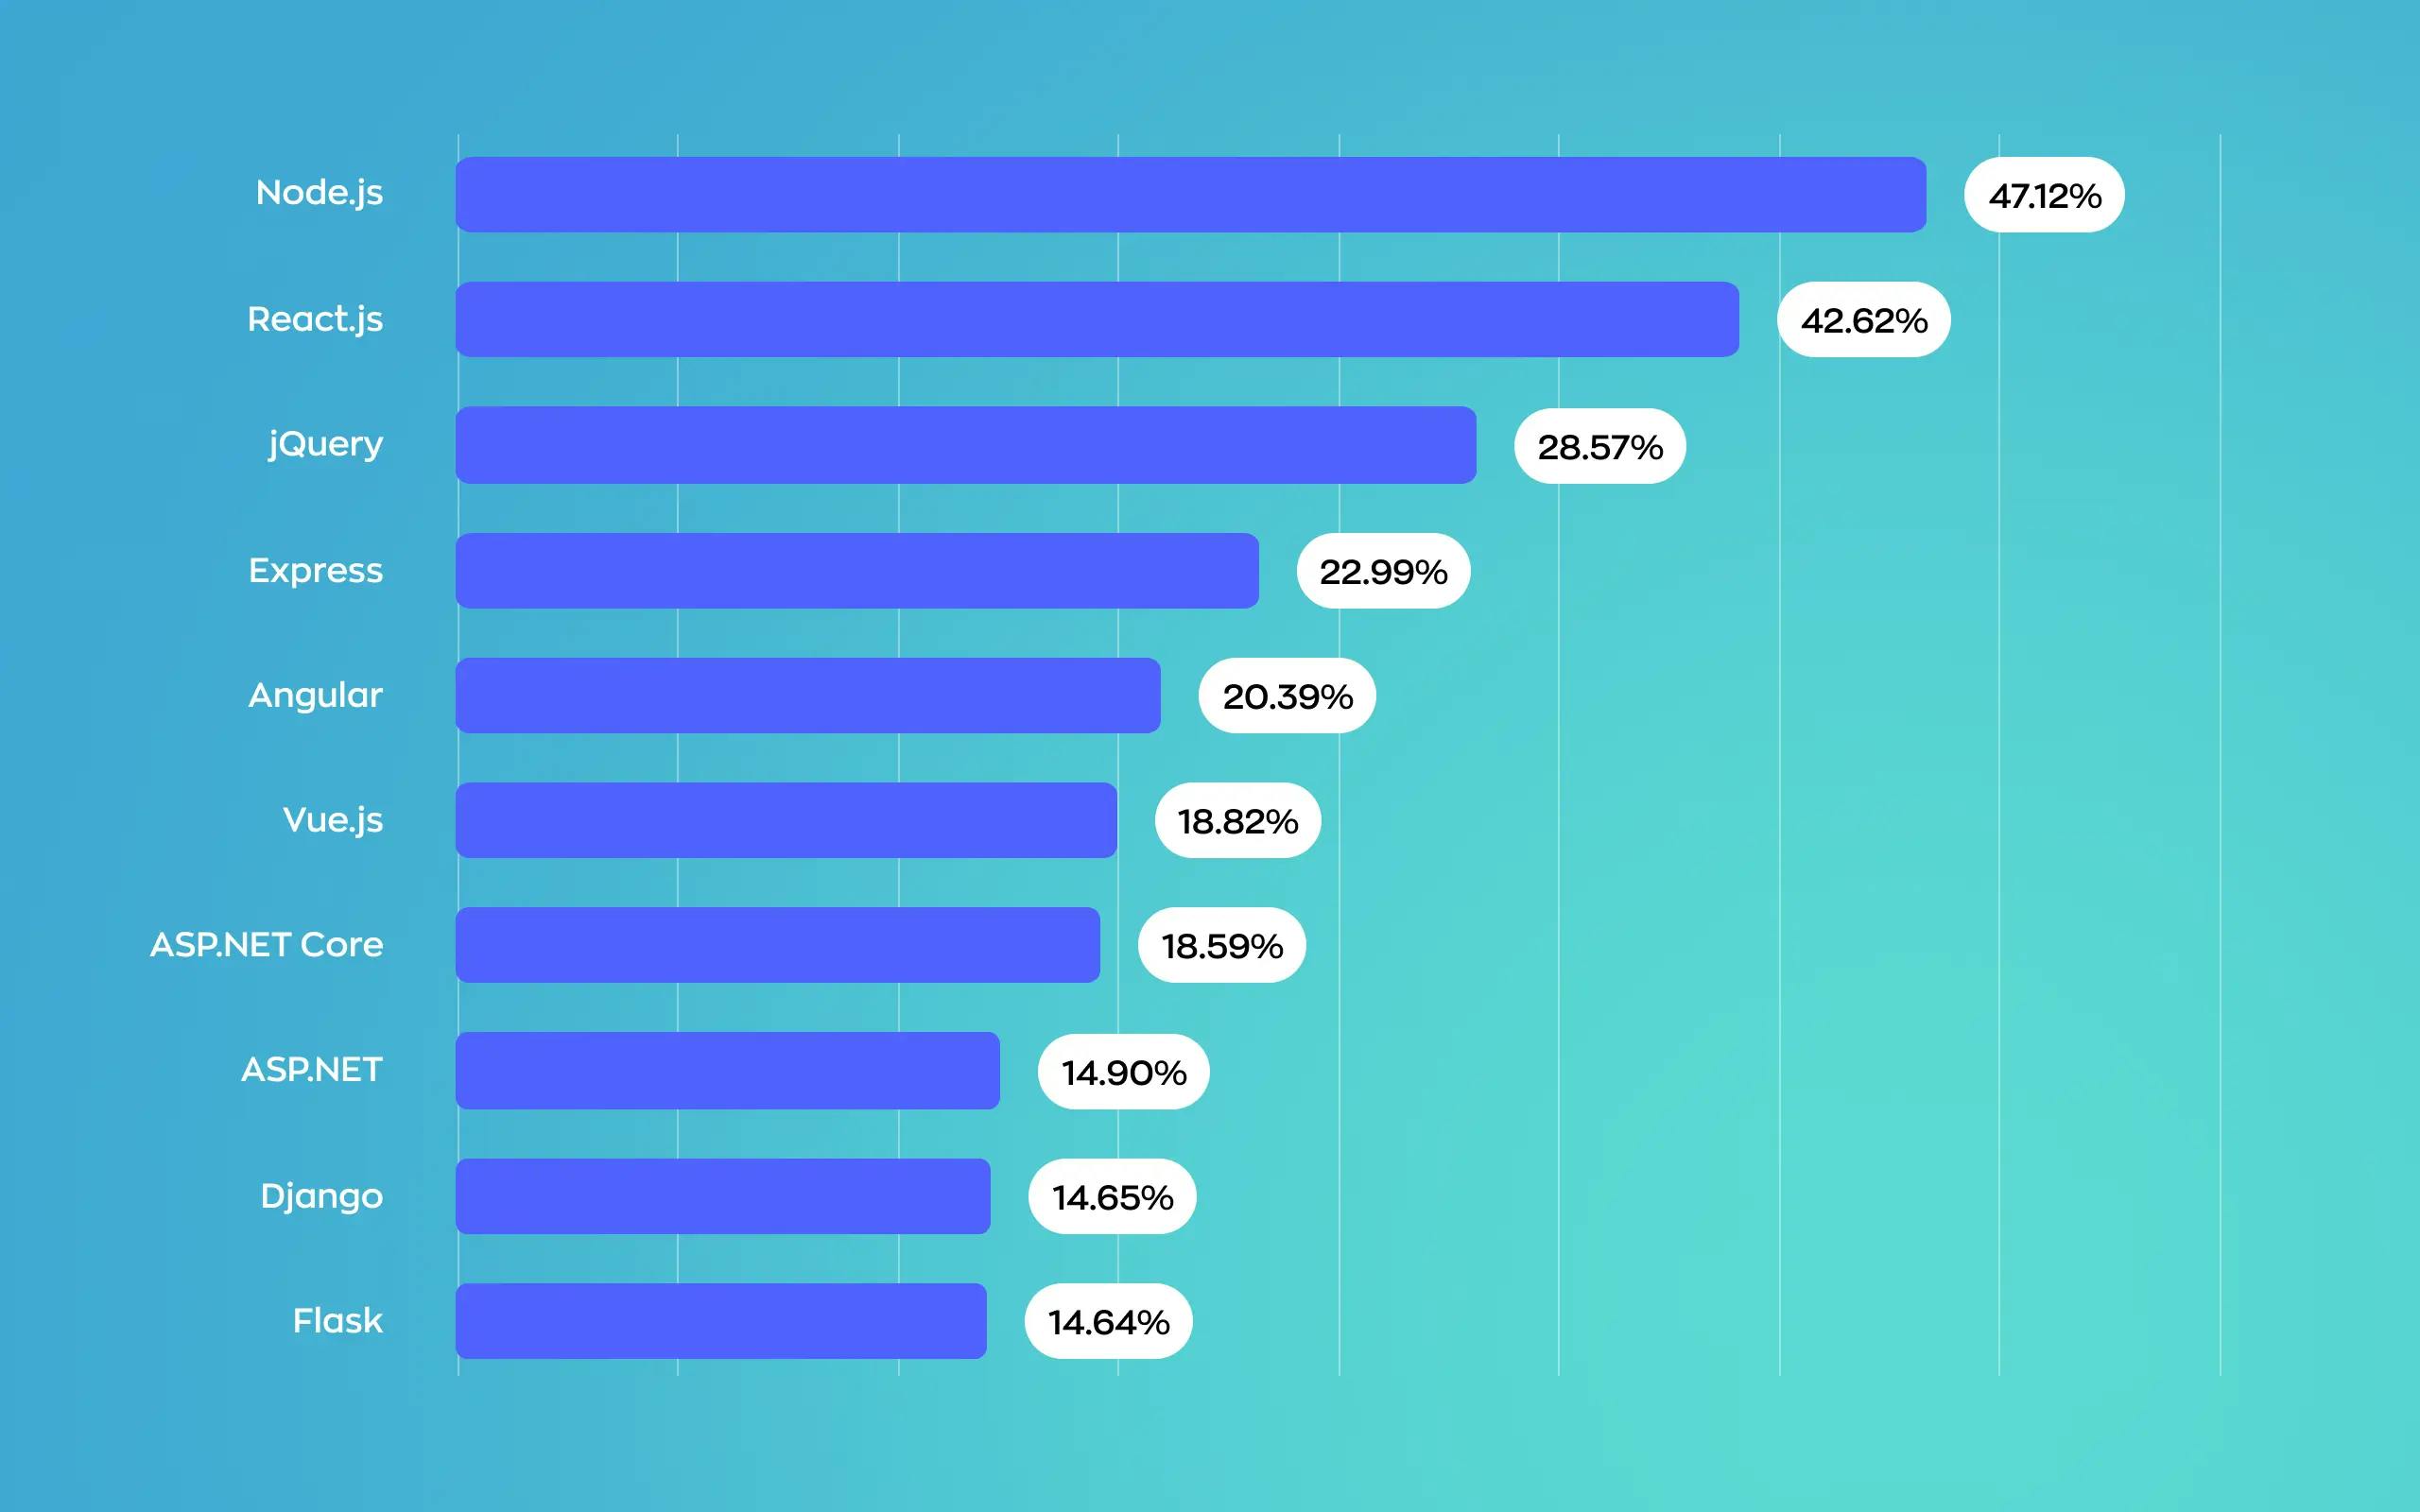 A statistic showing most used web frameworks among developers worldwide, as of 2022: Node.js 47.12%, React.js 42.62%